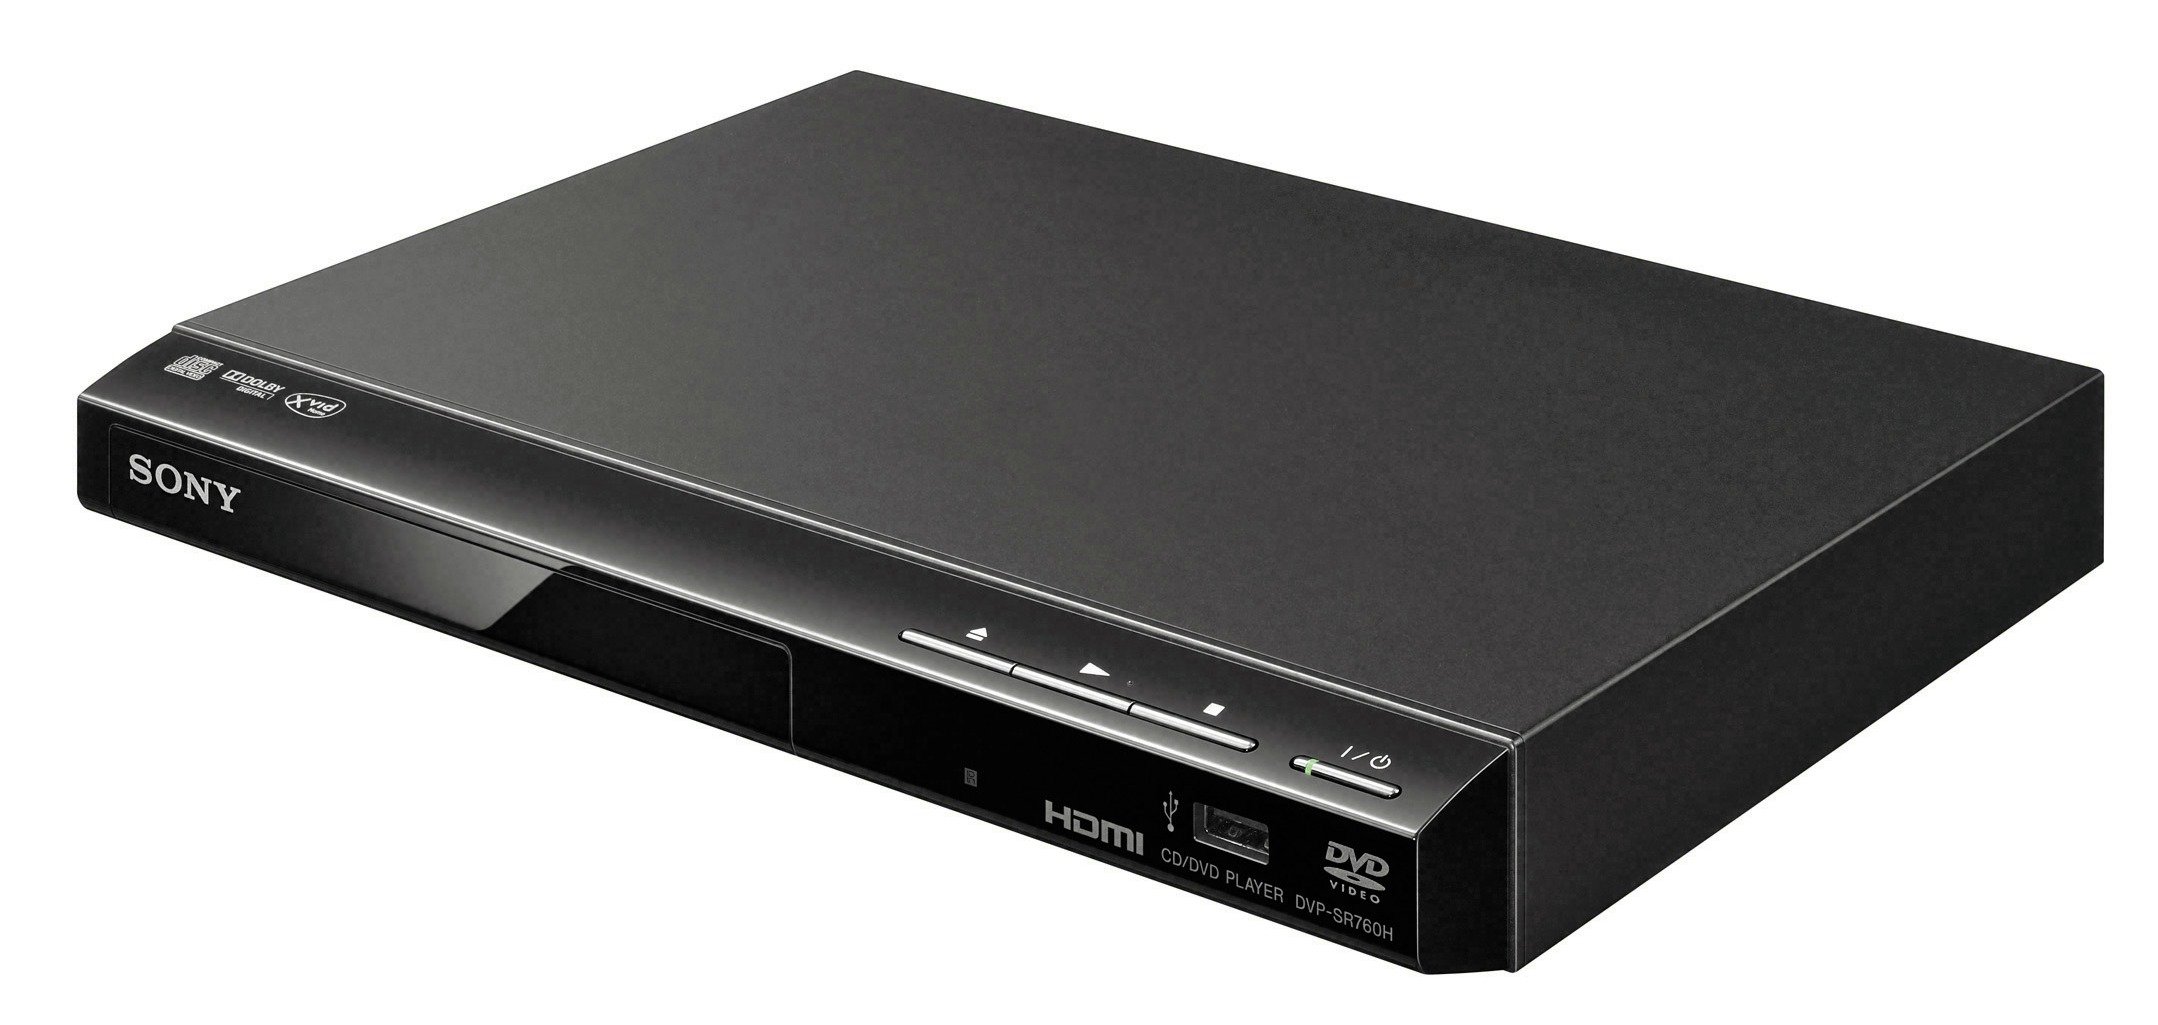 Sony DVPSR760 DVD Player with HD Upscaling Review